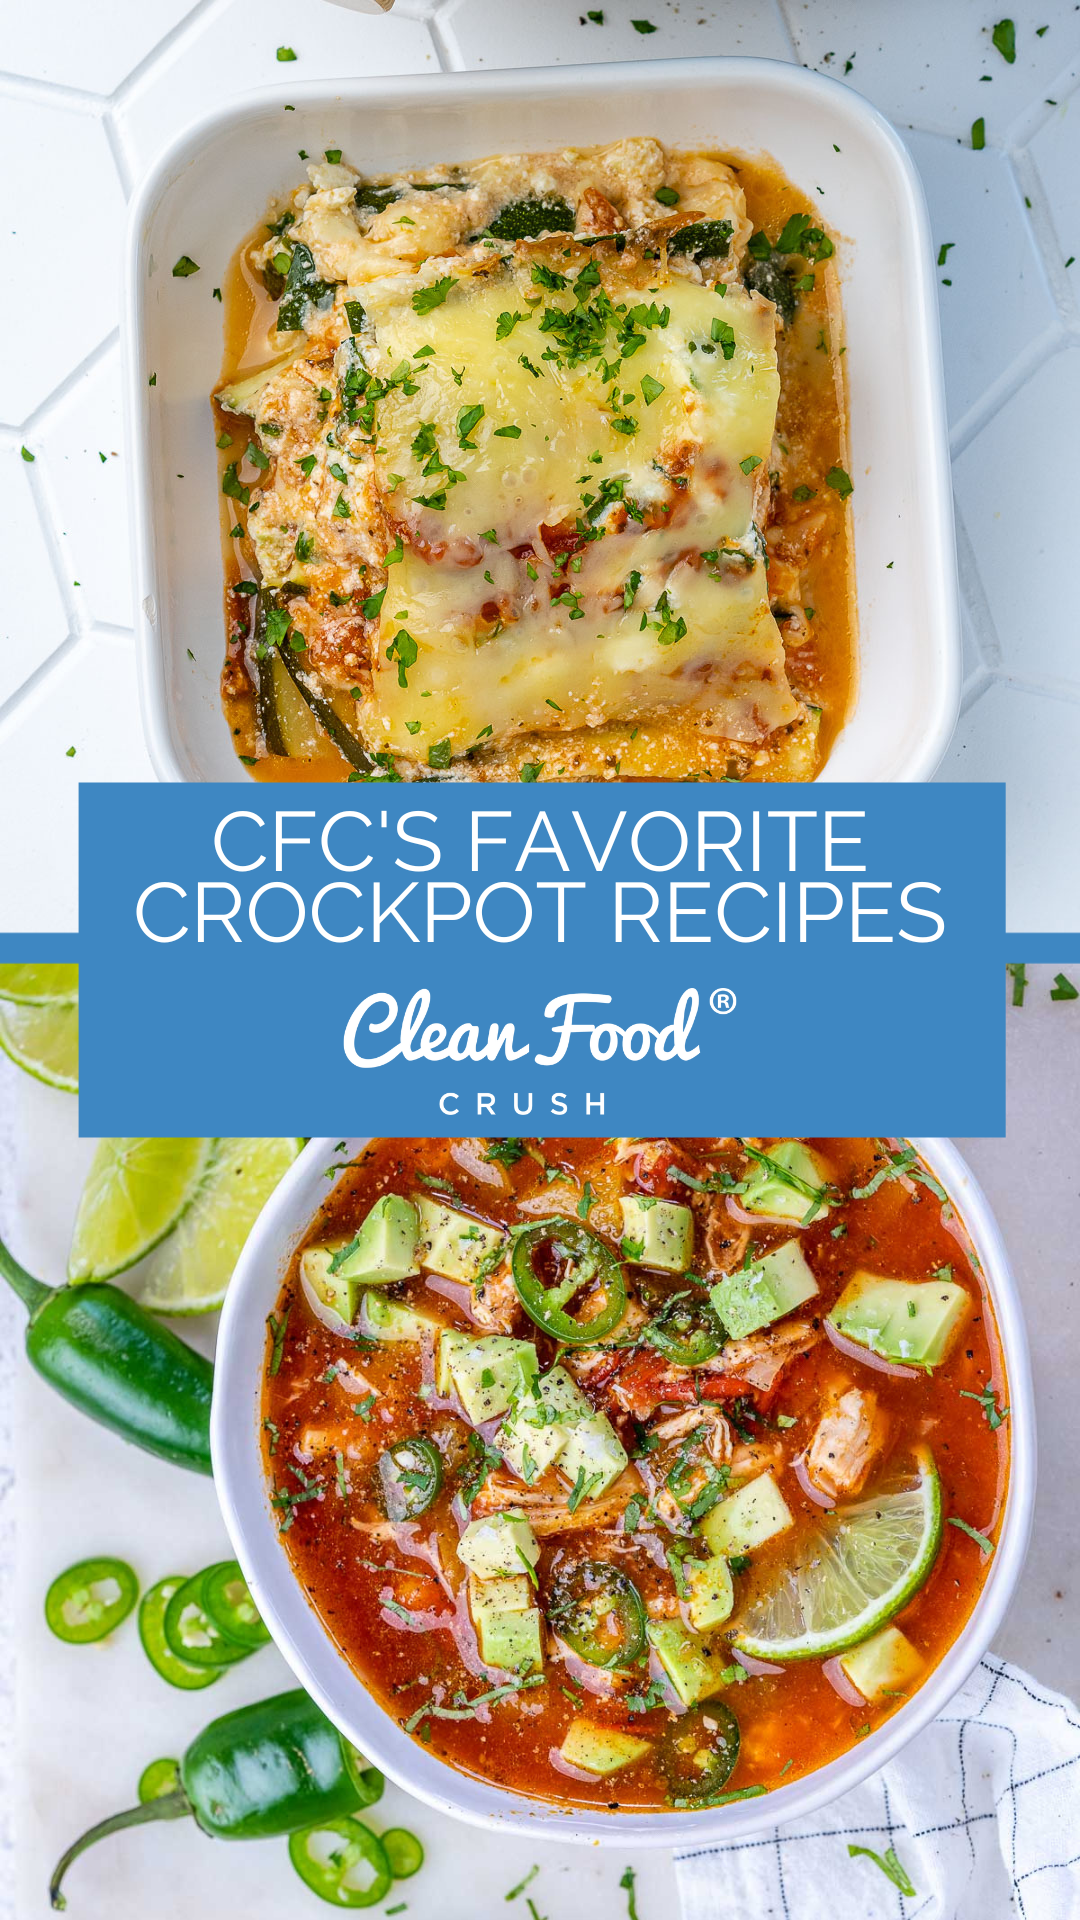 https://cleanfoodcrush.com/wp-content/uploads/2022/11/cfcs-favorite-slow-cooker-recipes.png